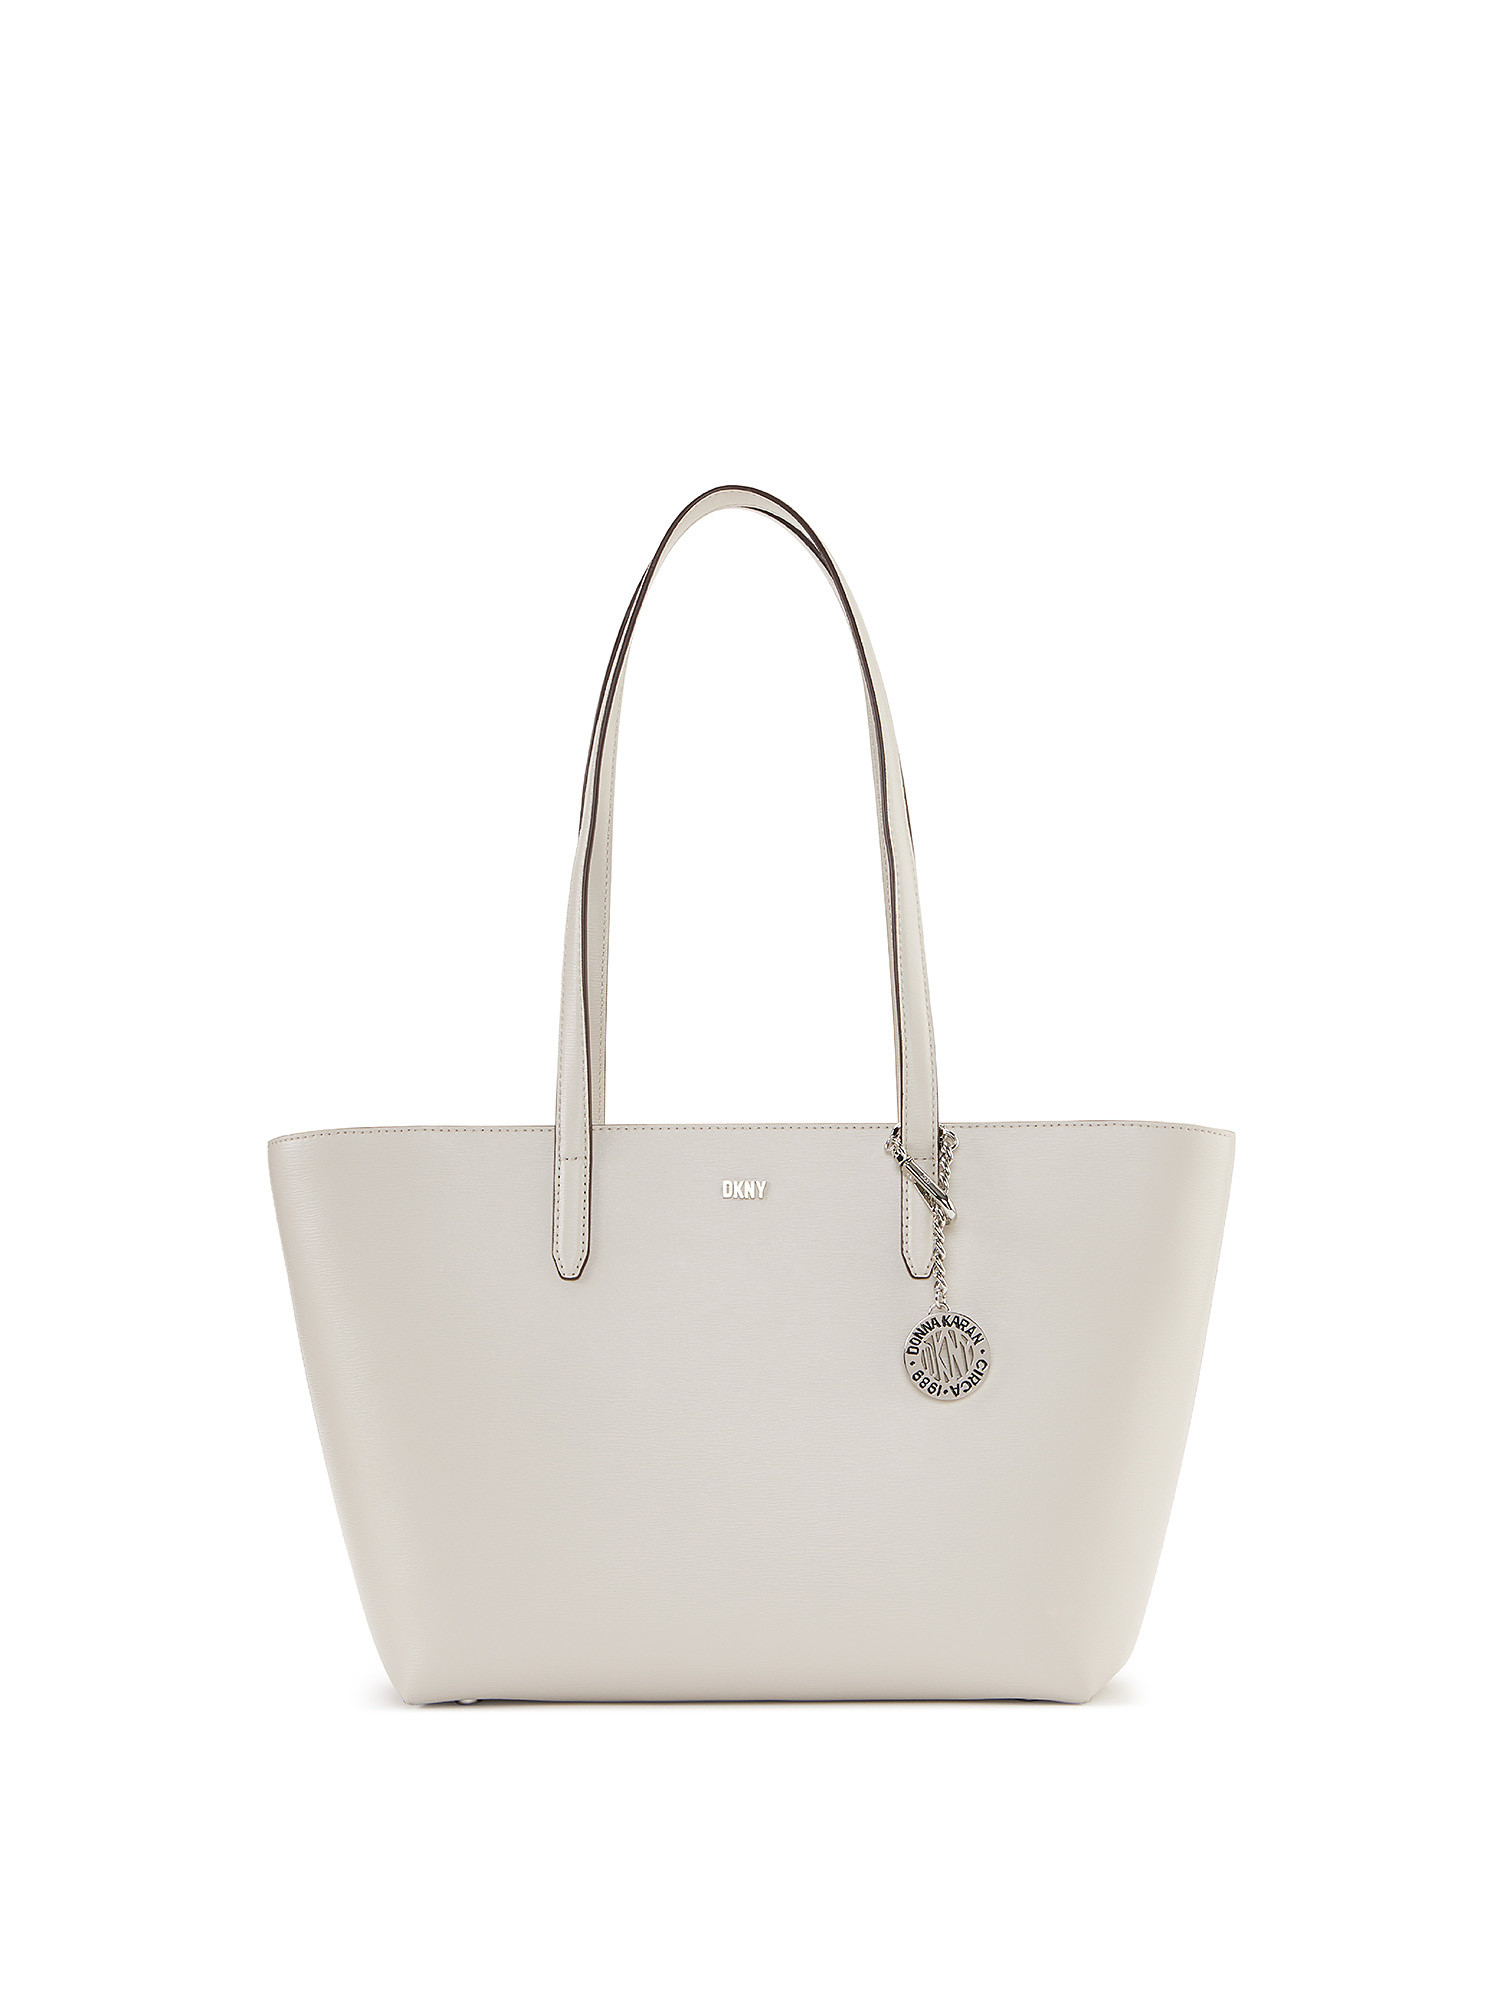 Dkny - Tote bag with removable accessory, White, large image number 0